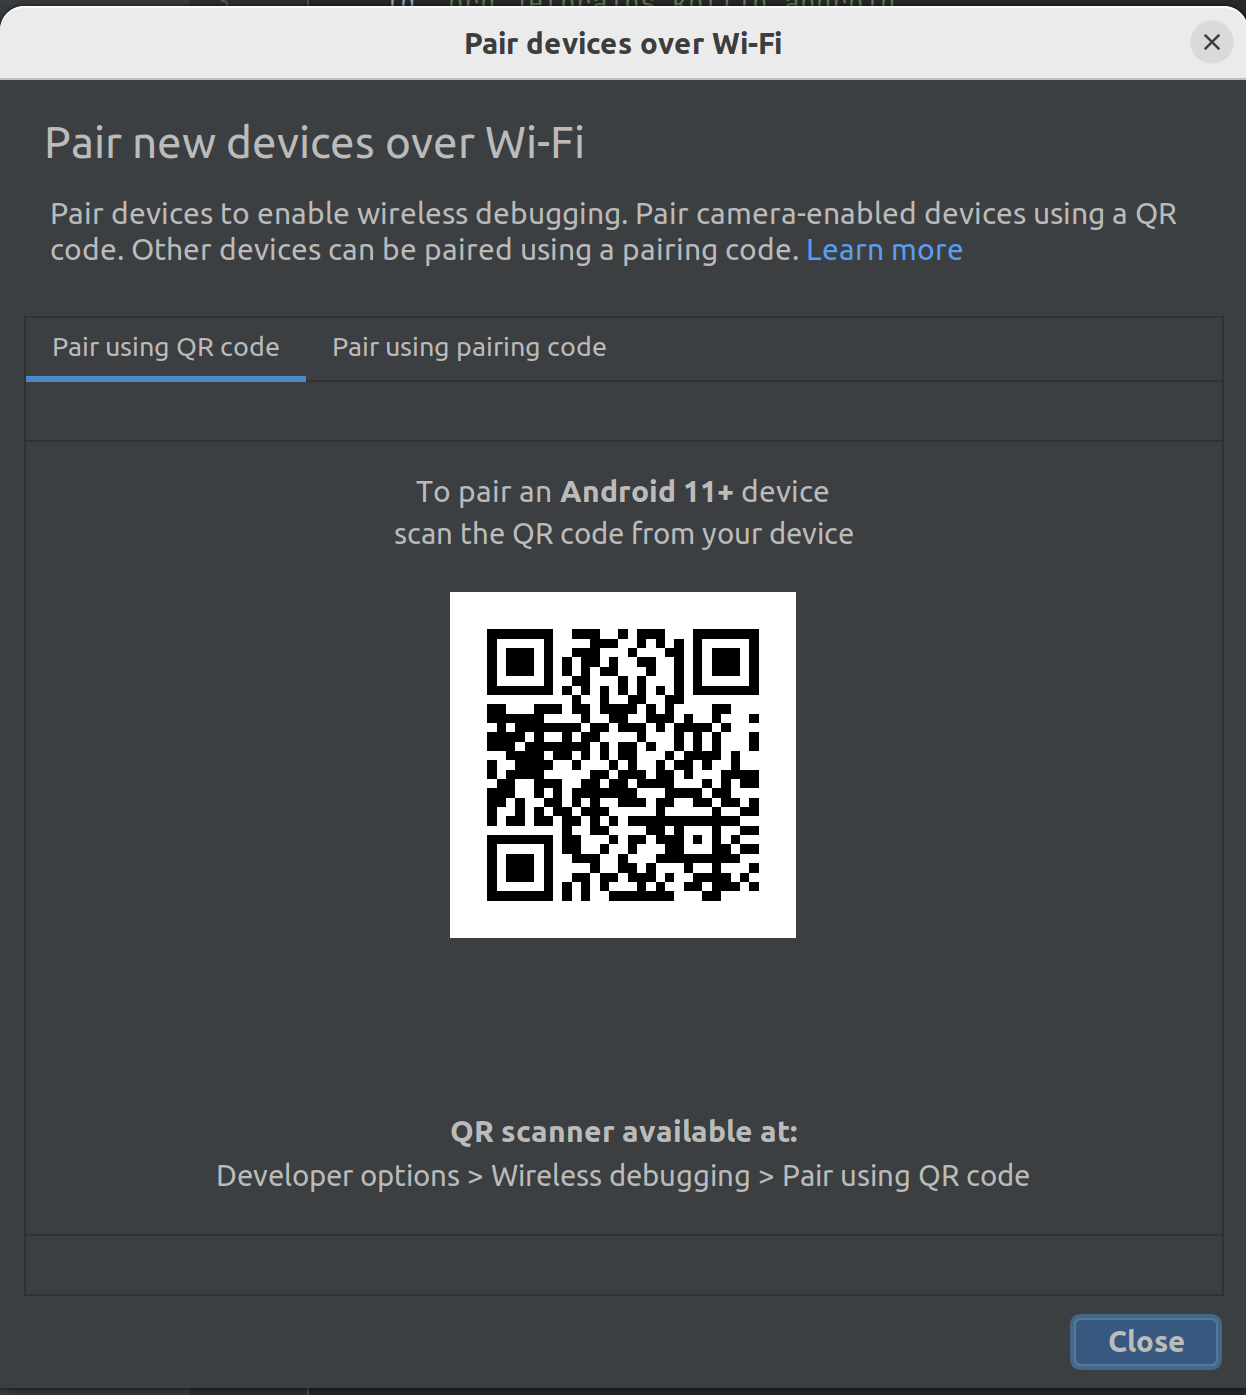 Pair devices using Wifi